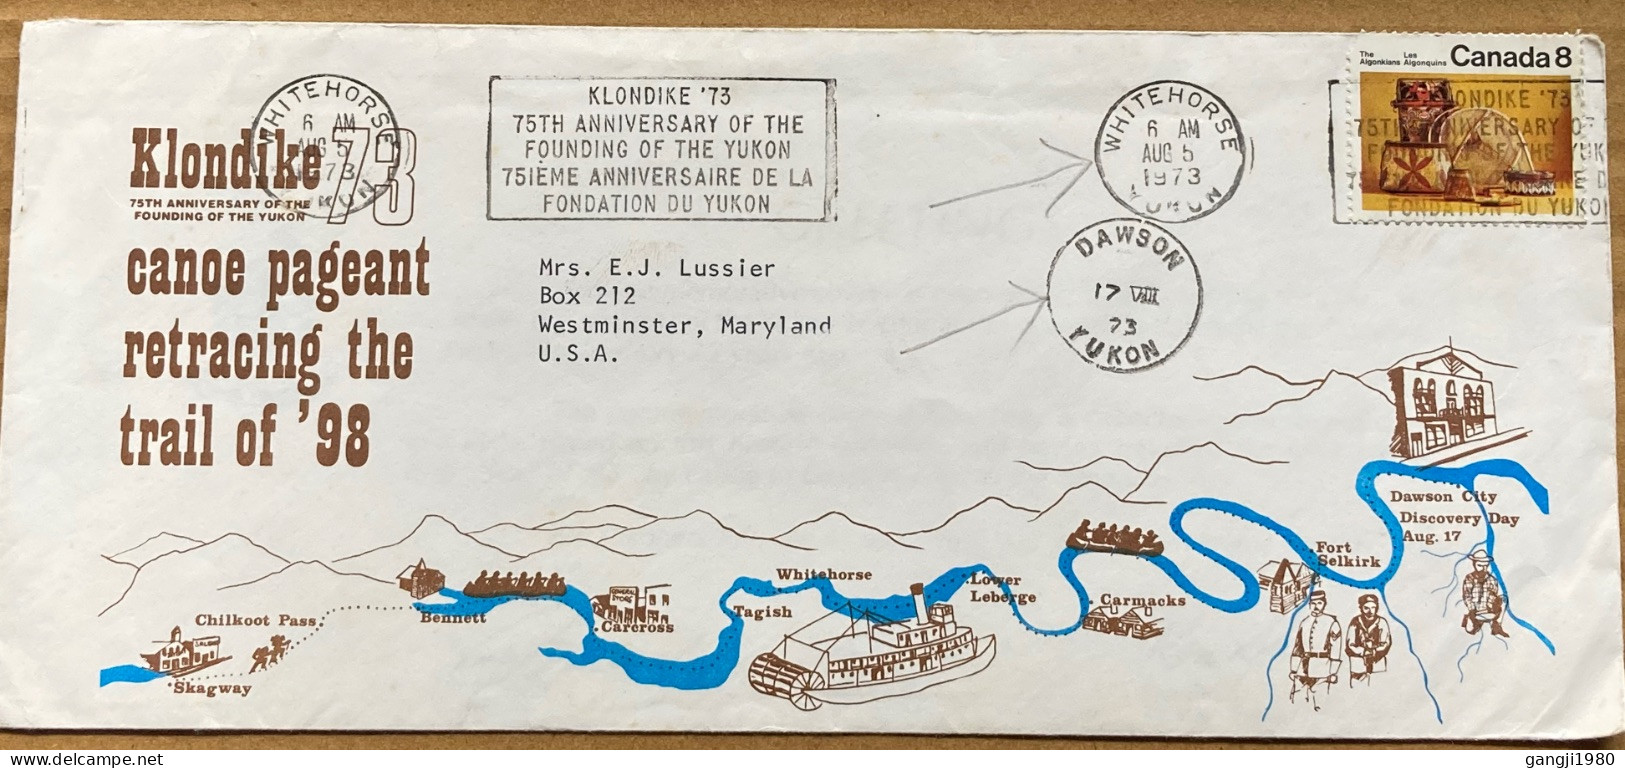 CANADA-1973, ILLUSTRATE COVER, LIMITED ISSUE, USED TO USA, KLONDIKE 75TH ANV. YUKON, MACHINE SLOGAN, MAP, PEOPLE, SHIP. - Covers & Documents